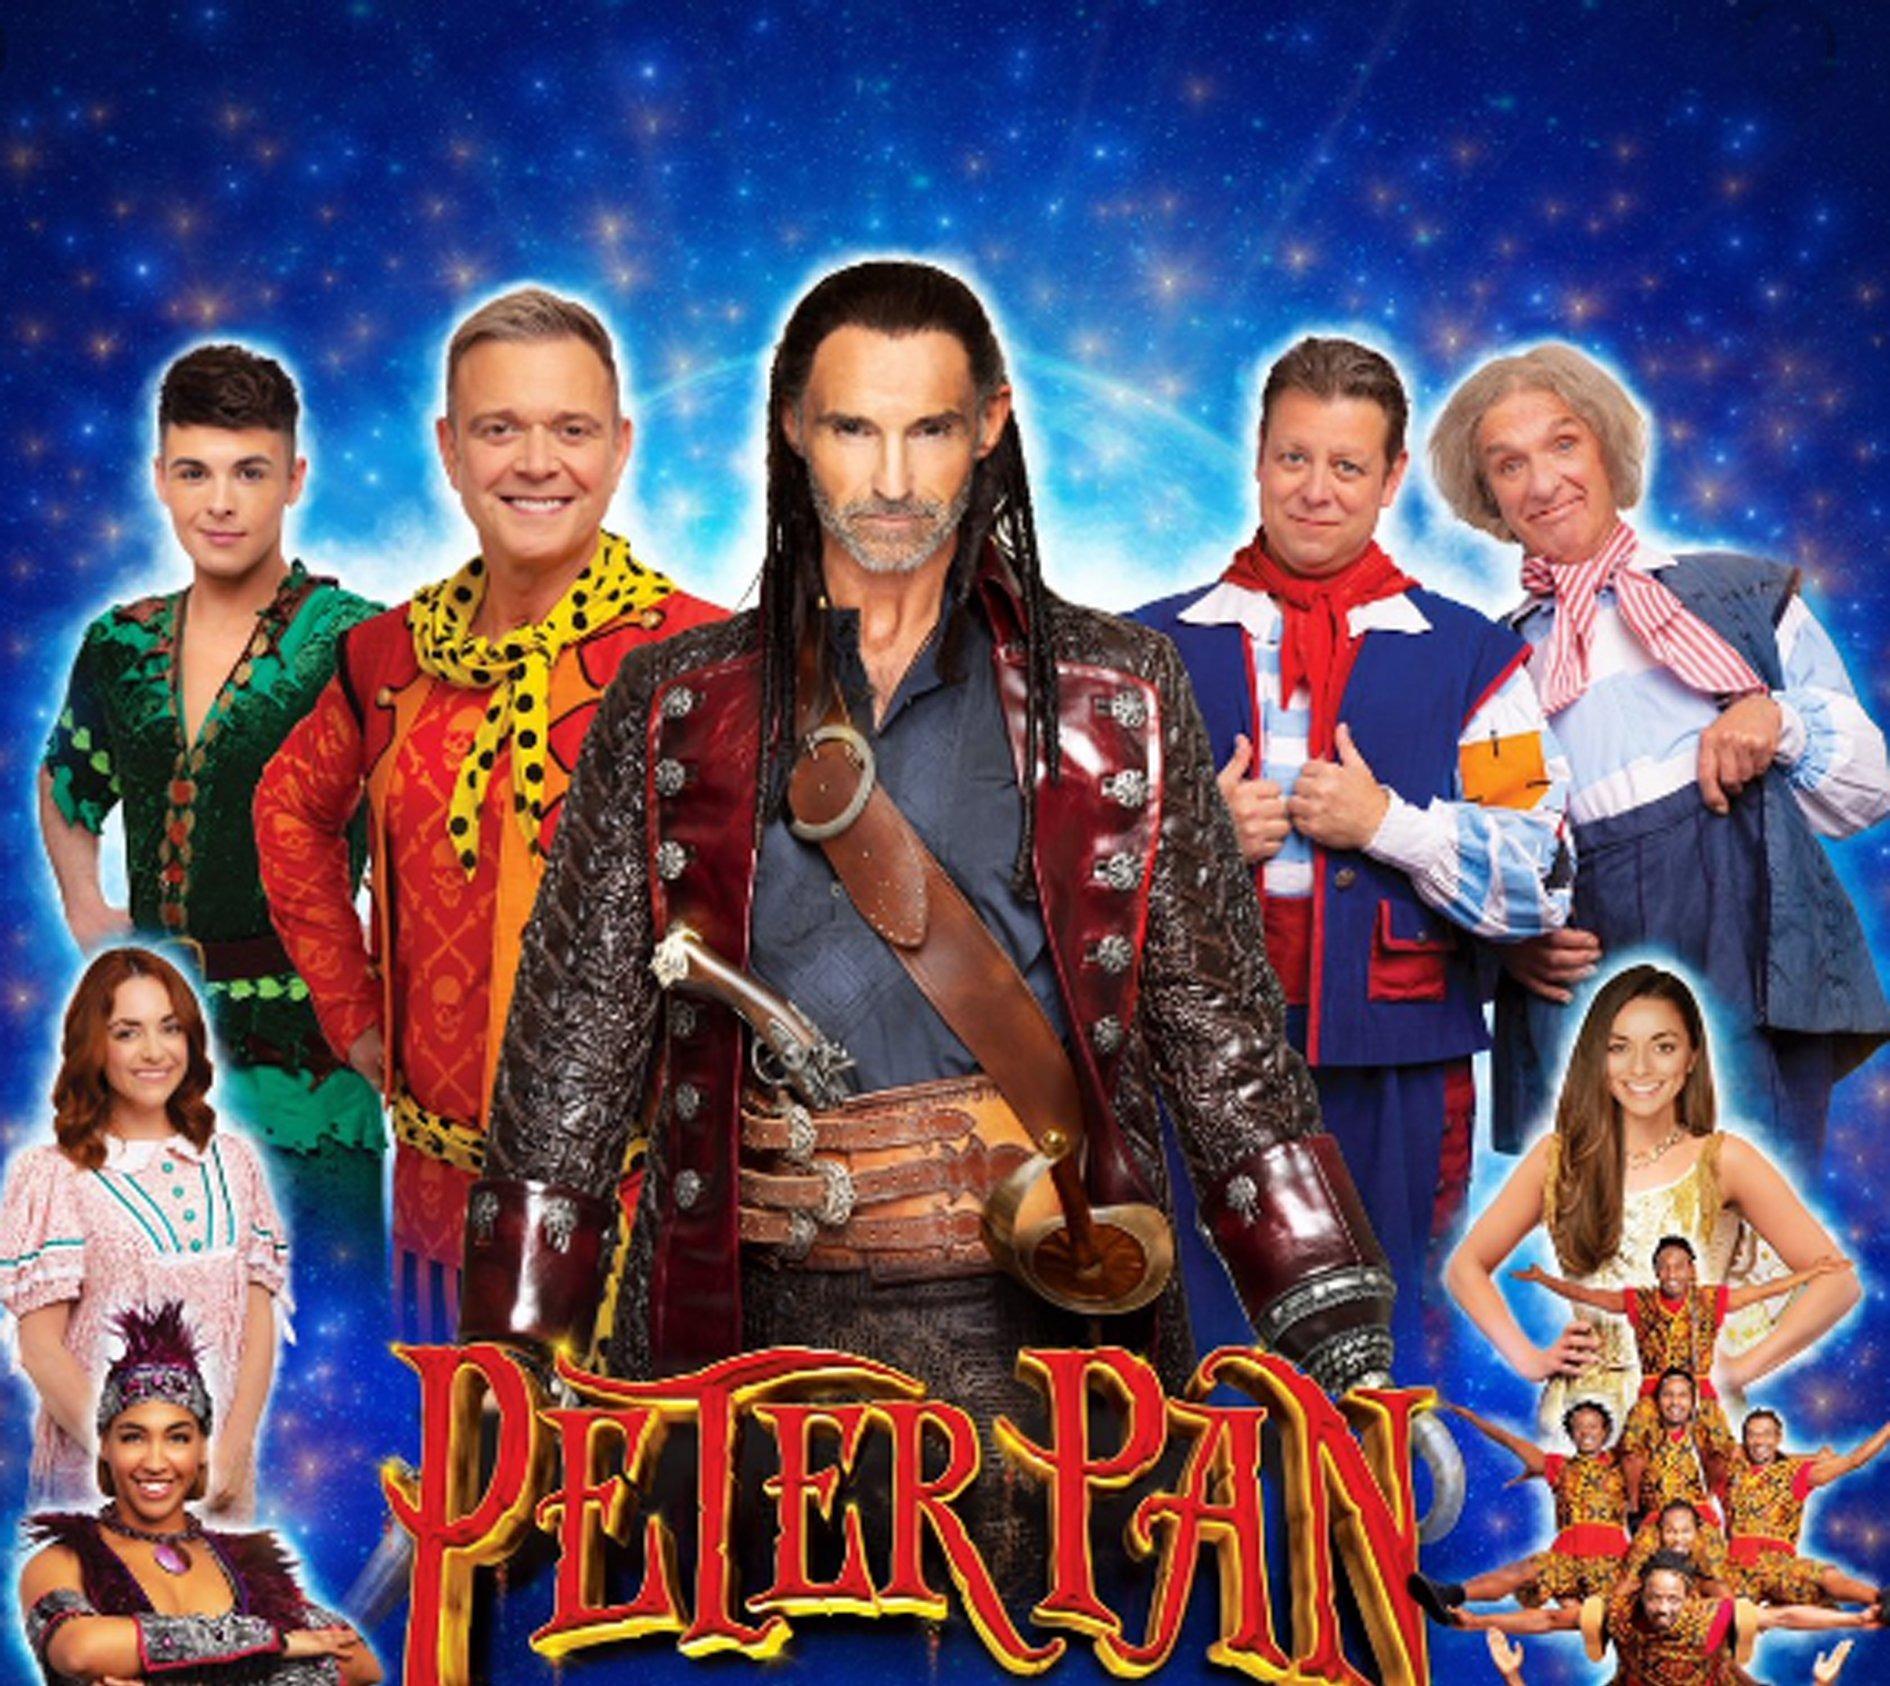 Further afield....... Peter Pan will be performed at The Mayflower, Southampton from November 14 2019 to December 5 2020.